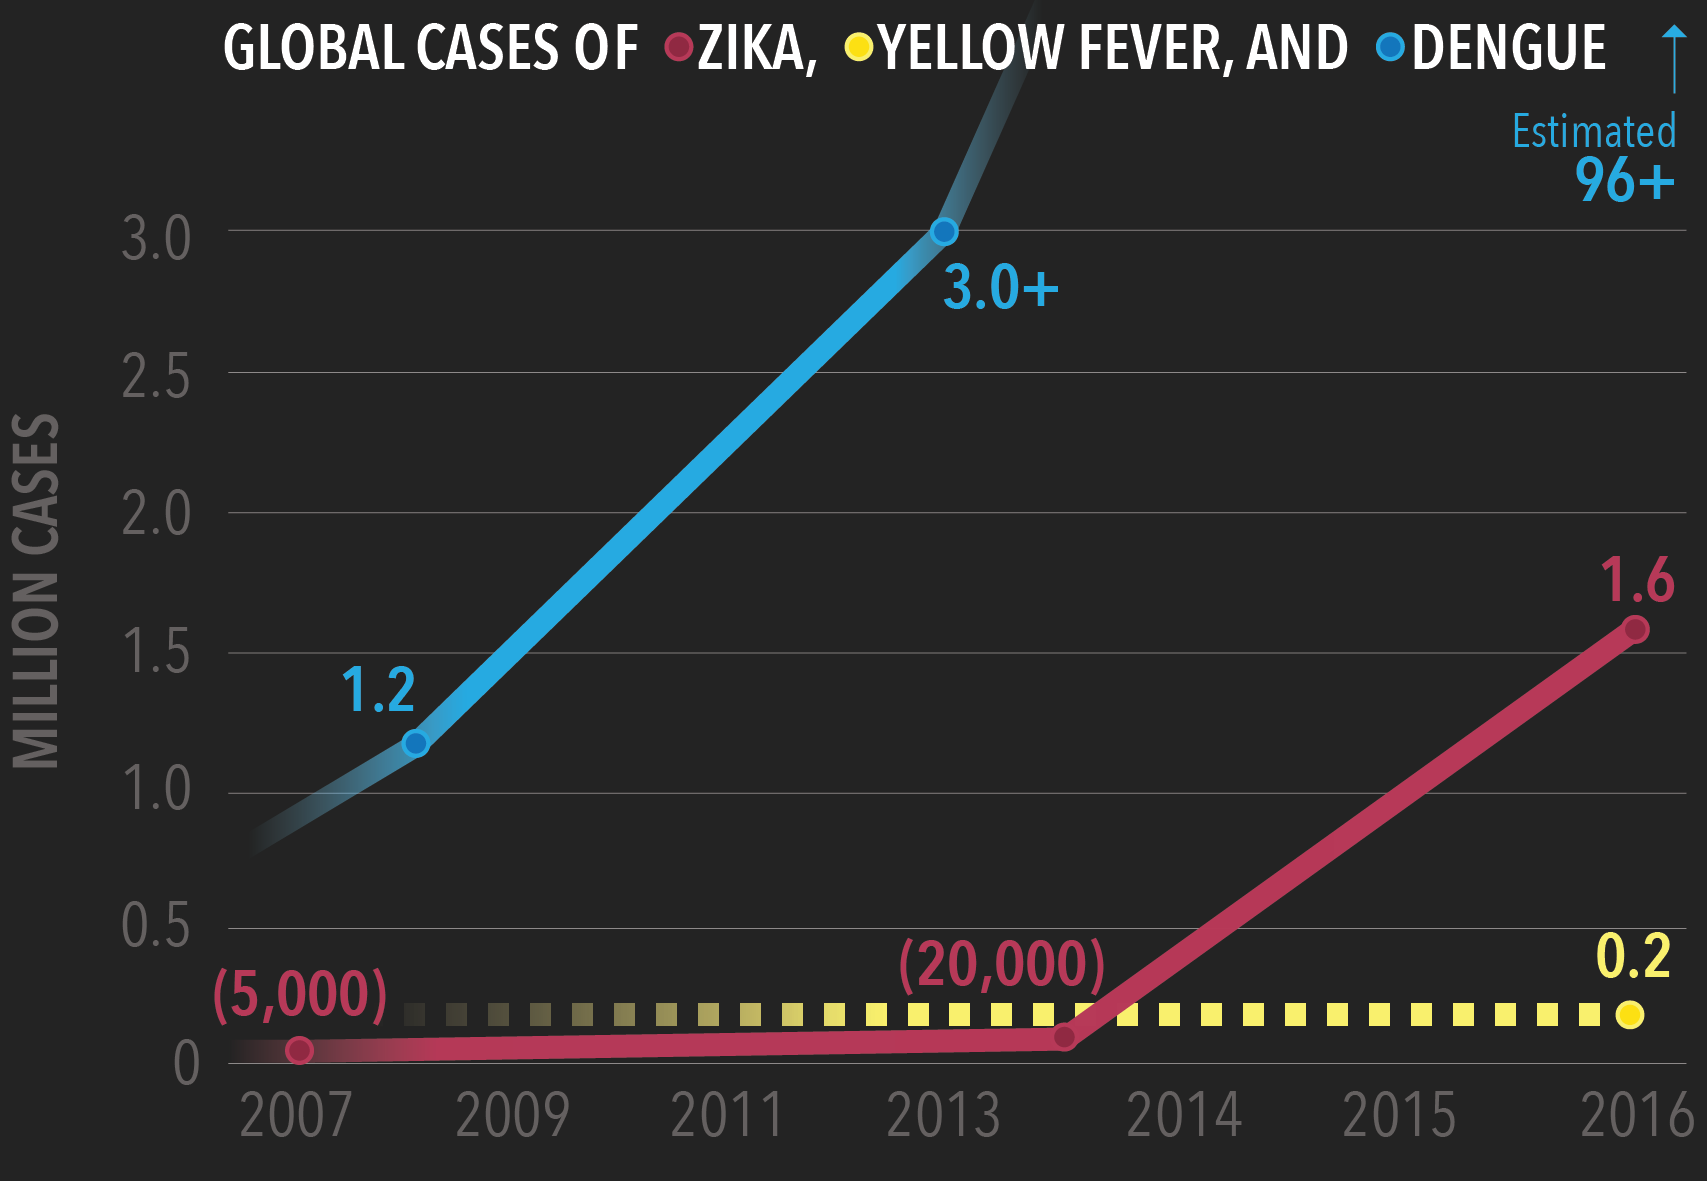 Prevalence of Zika, Yellow Fever, &amp; Dengue Virus Cases. dengue at 1.2 million in 2008, 3+ million in 2013. zika at 5,000 in 2007, 20,000 in 2013, and 1.6 million in 2016. Yellow fever remains around 0.2 million from 2007-2016